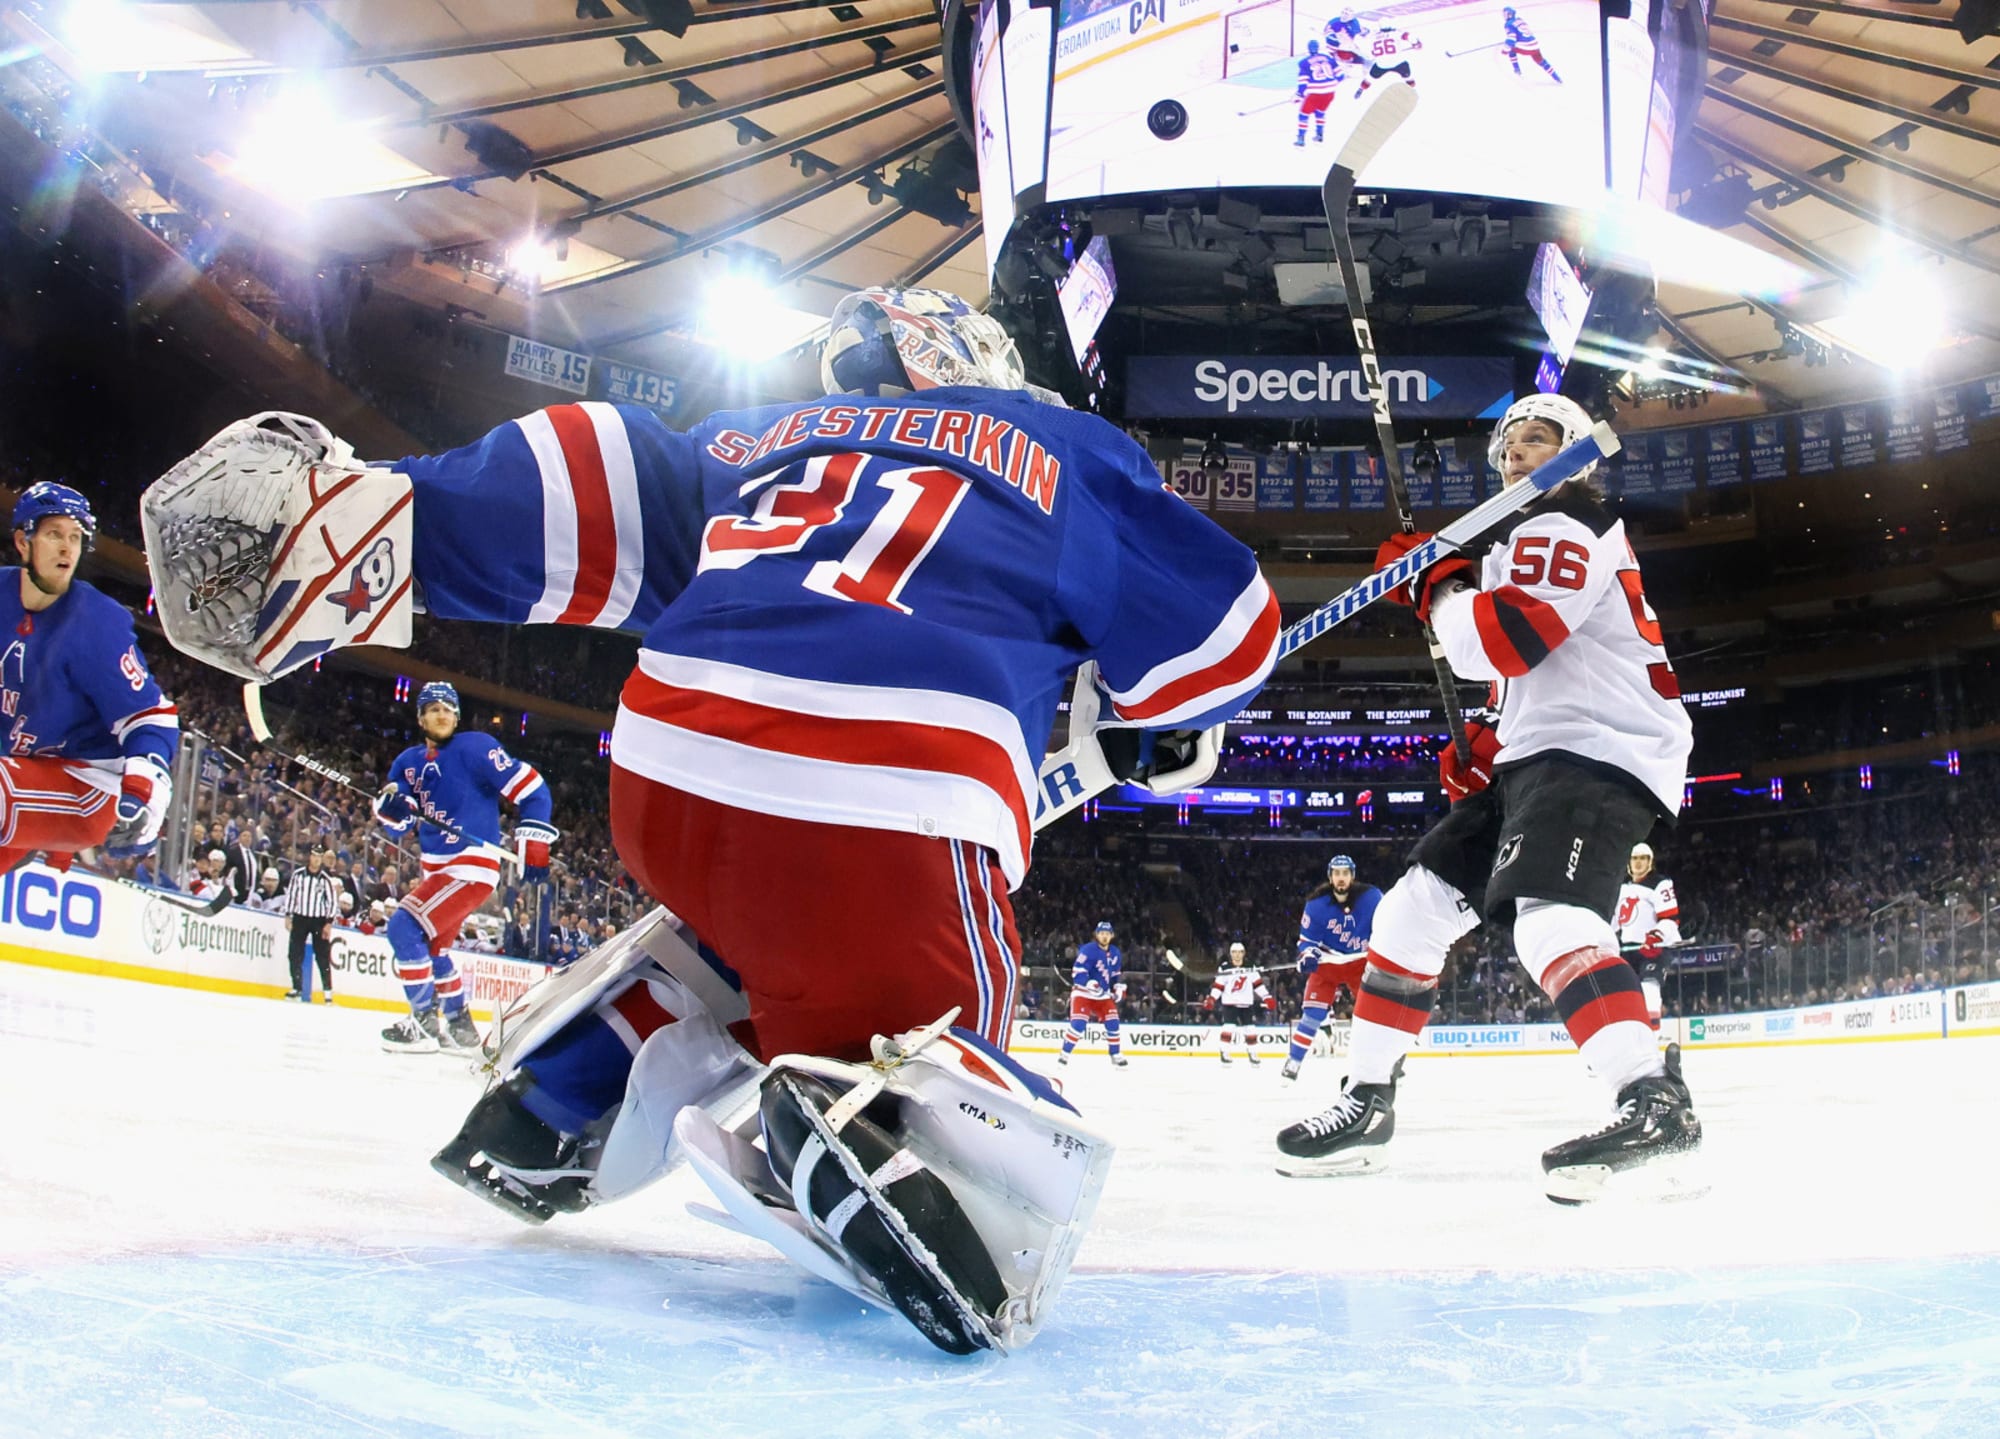 5 key takeaways from the NY Rangers Game 1 win over the NJ Devils